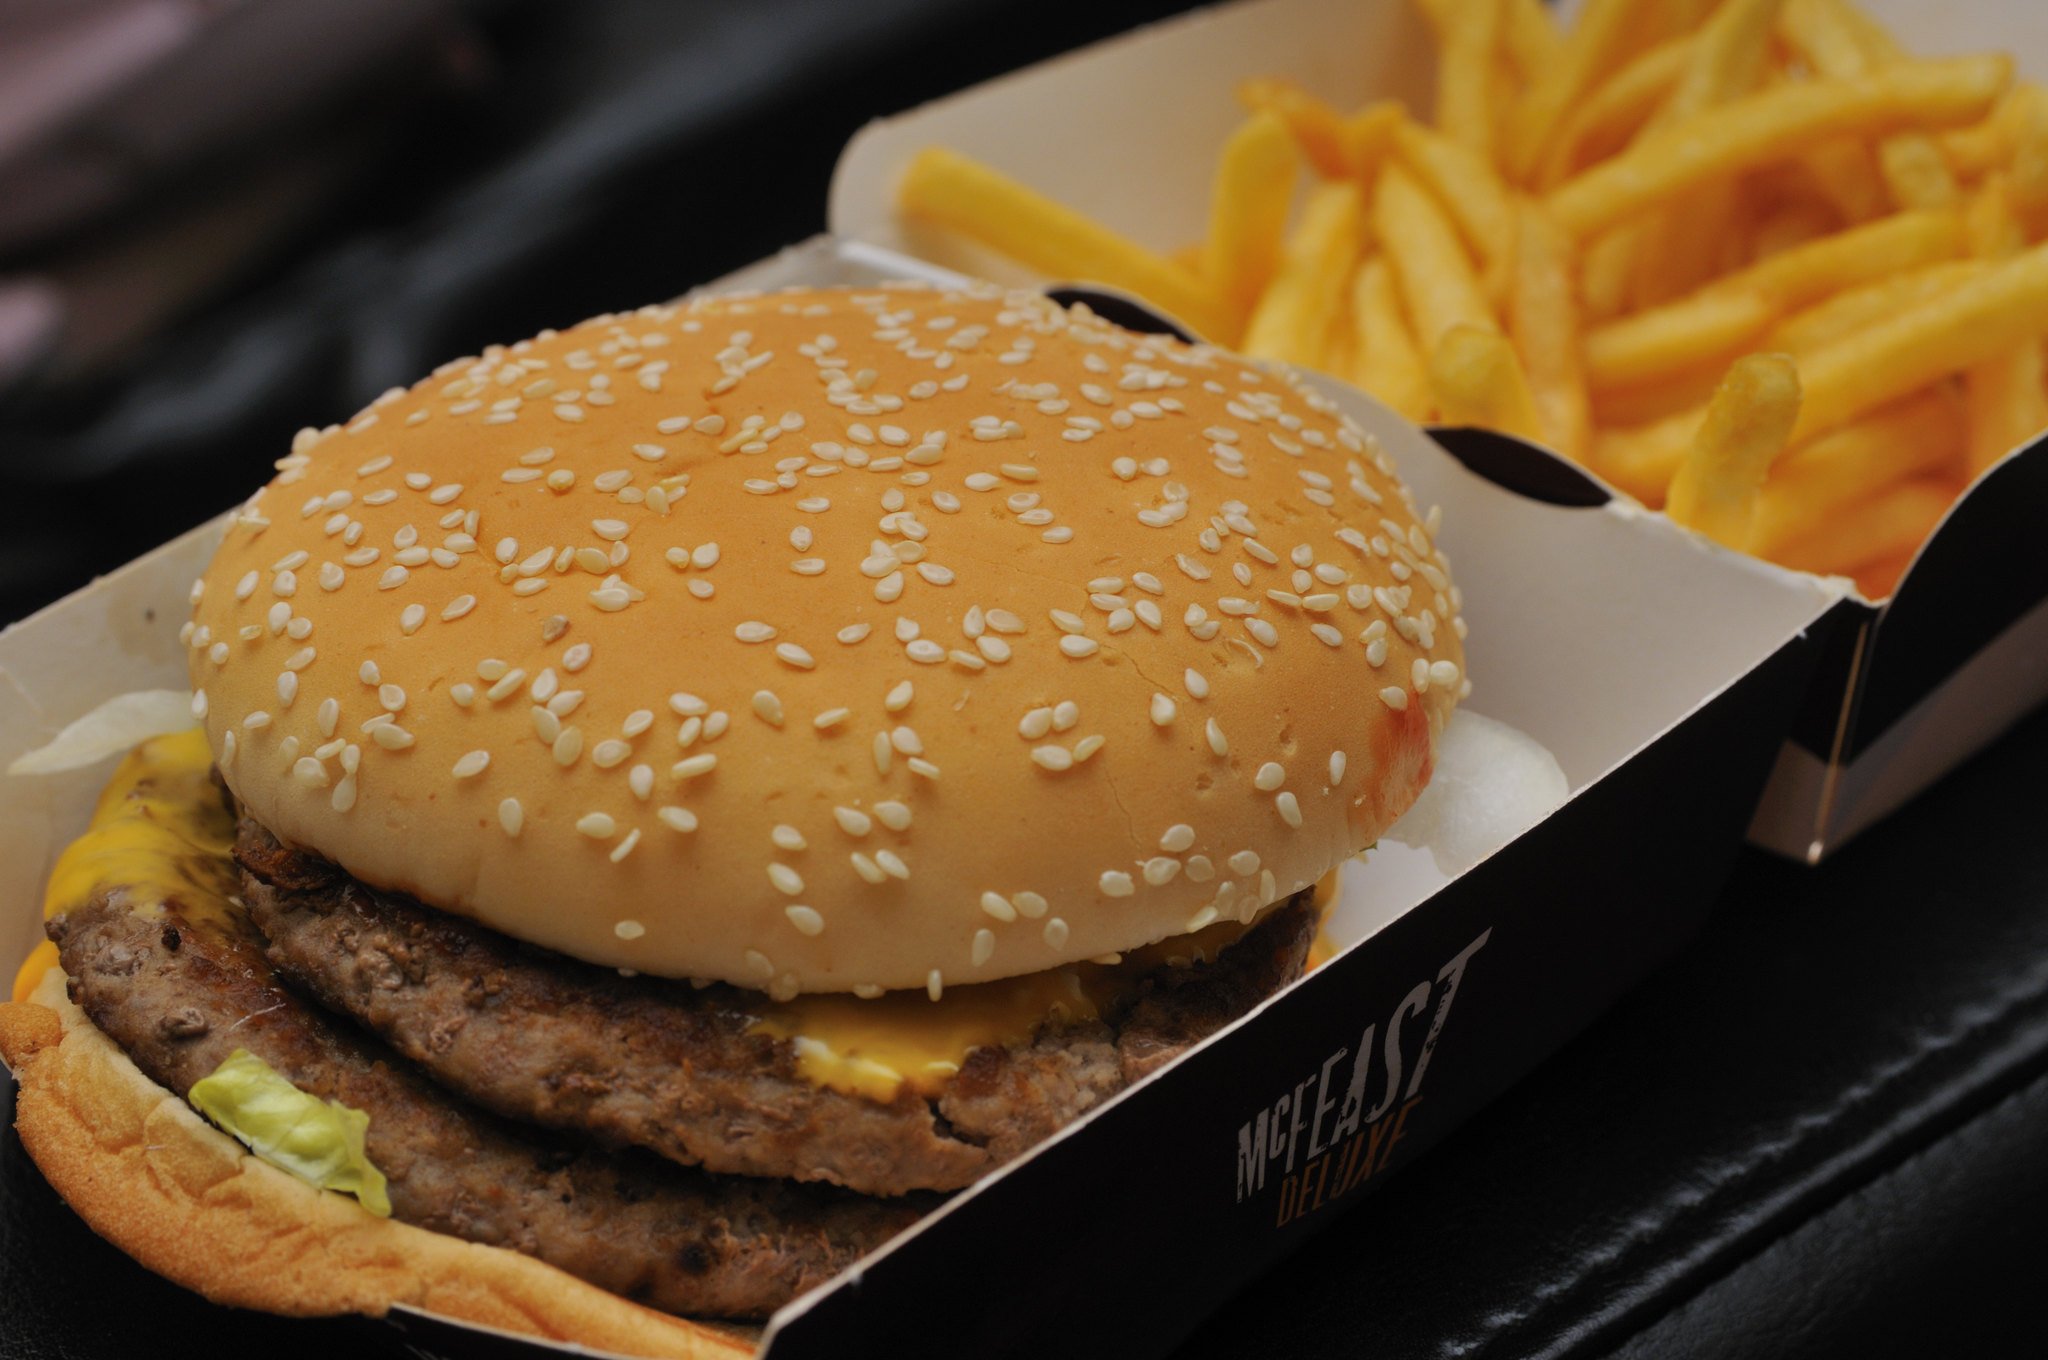 A close-up view of a McDonald's McFeast Deluxe meal. Image taken on October 25, 2008 | Photo: Flickr/Chris Bloom